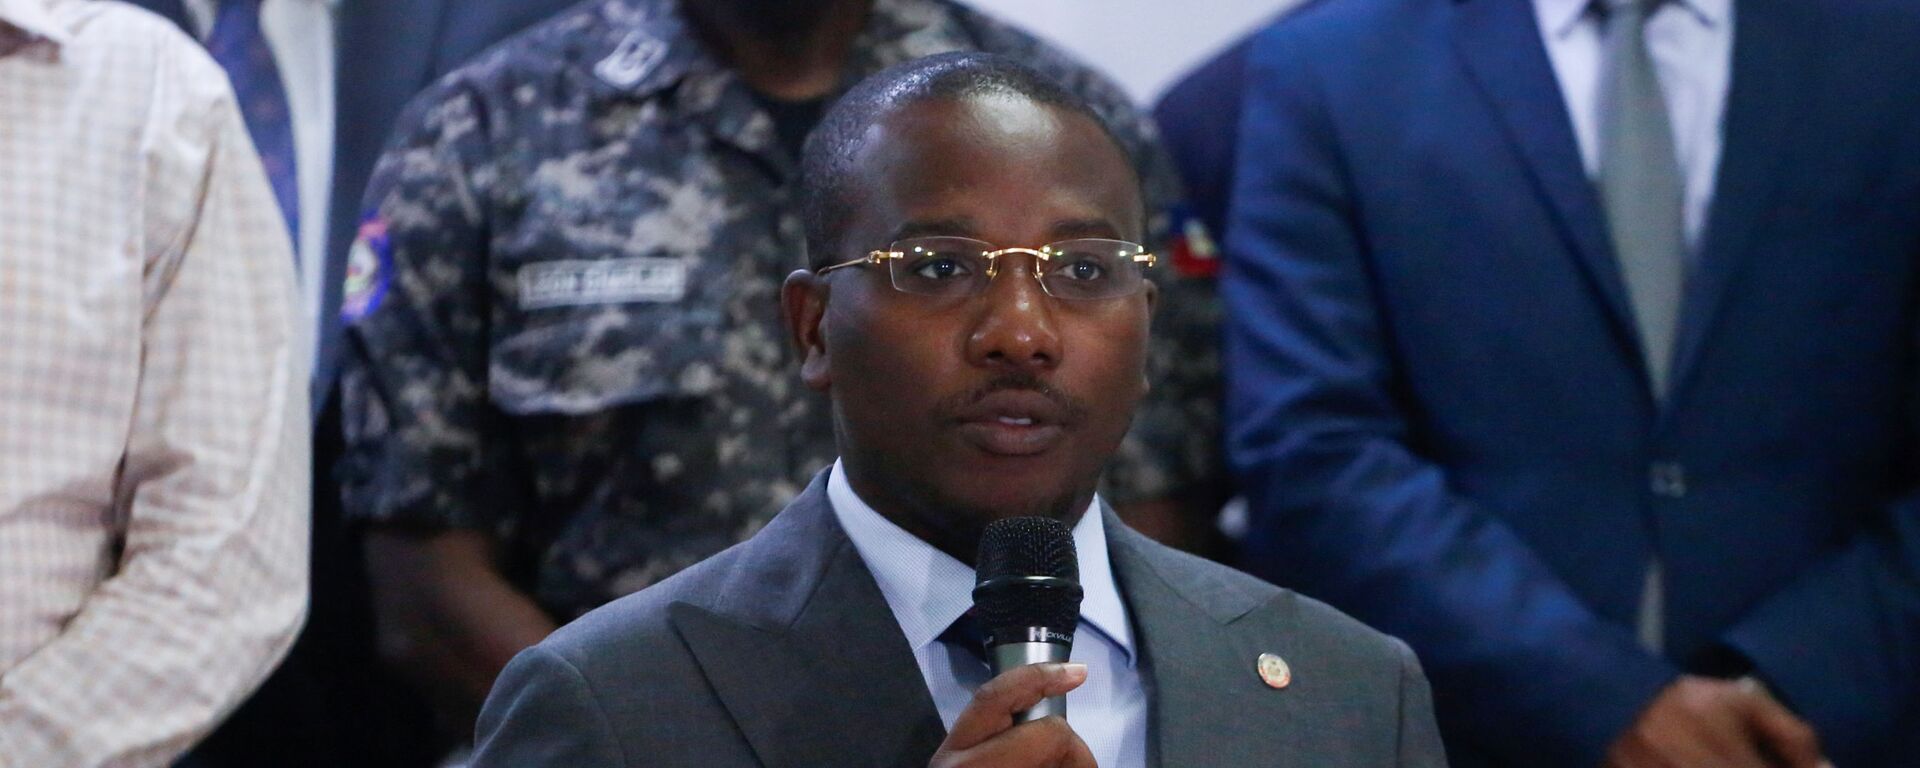 Haiti's interim Prime Minister Claude Joseph addresses the audience after suspects in the assassination of President Jovenel Moise, who was shot dead early Wednesday at his home, were shown to the media, in Port-au-Prince, Haiti, 8 July 2021.  - Sputnik International, 1920, 11.07.2021